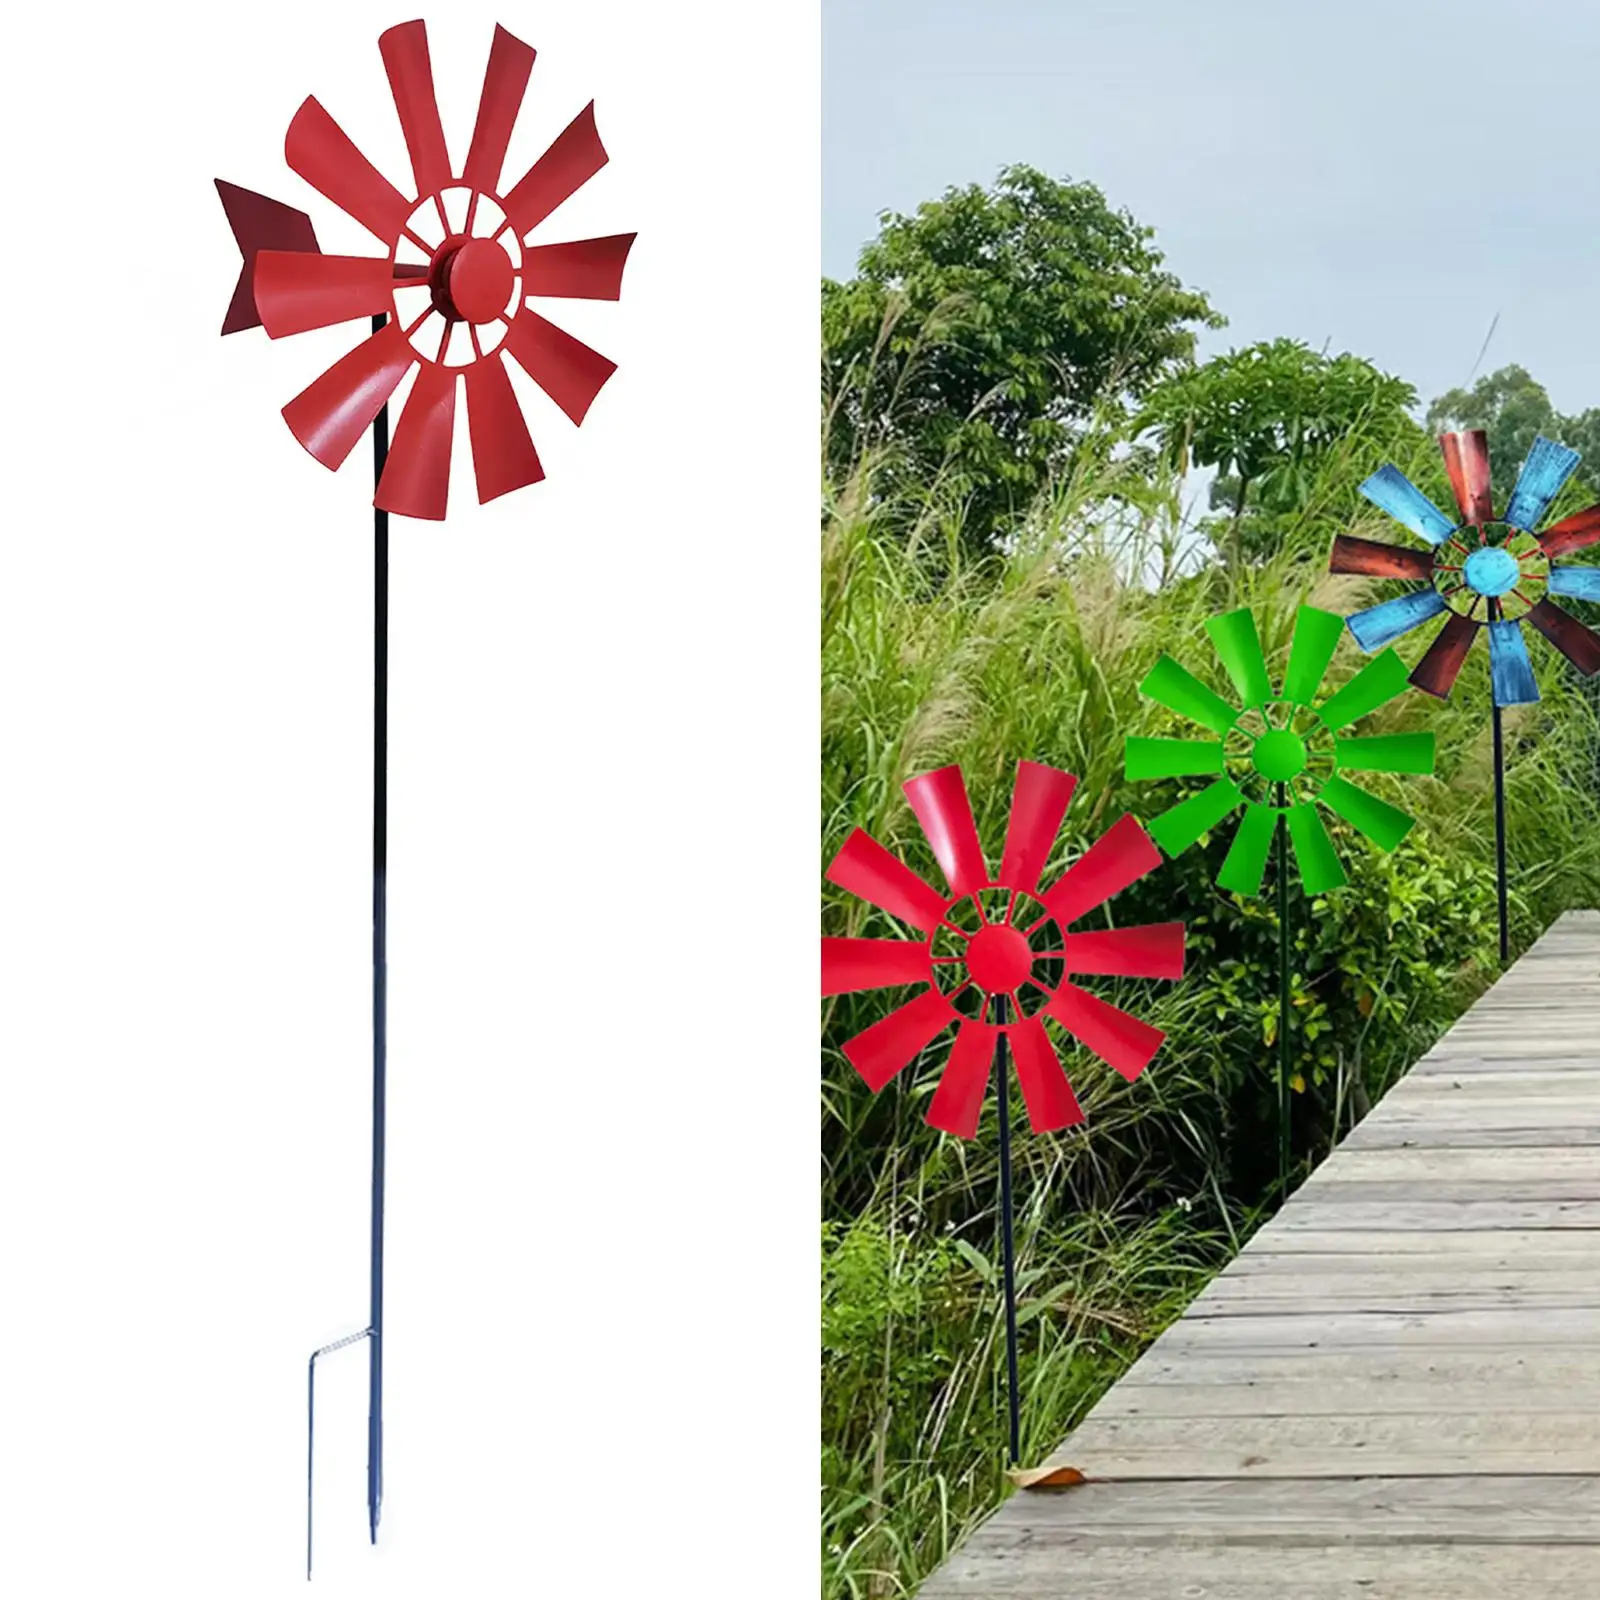 28inch Decorative Lawn Ornament Wind Mill for Outdoor Patio Decoration